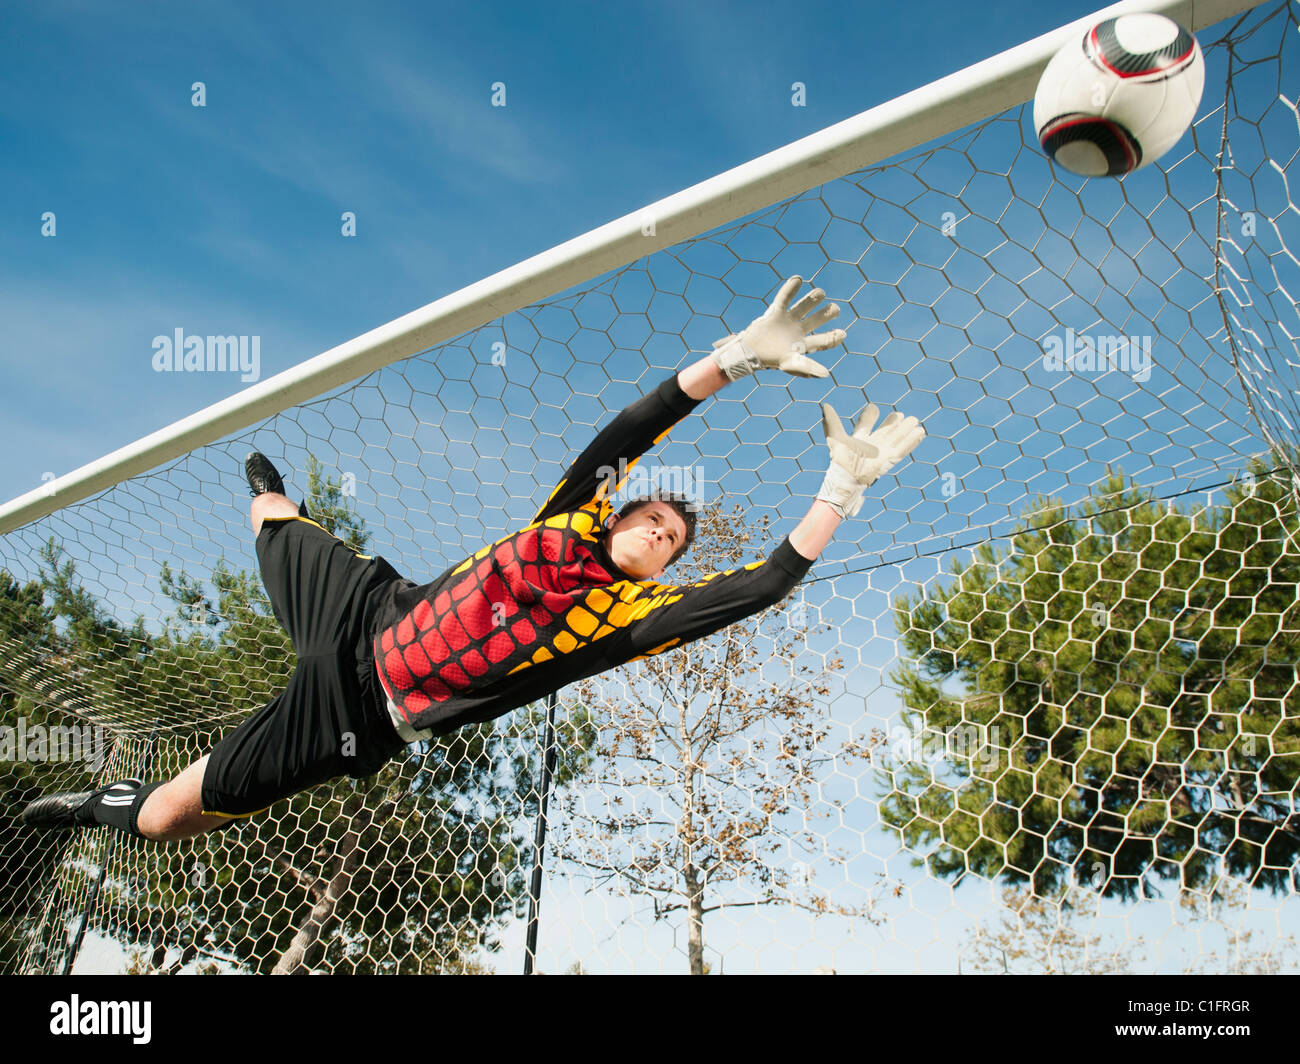 Mixed race goalkeeper in mid-air protecting goal Stock Photo